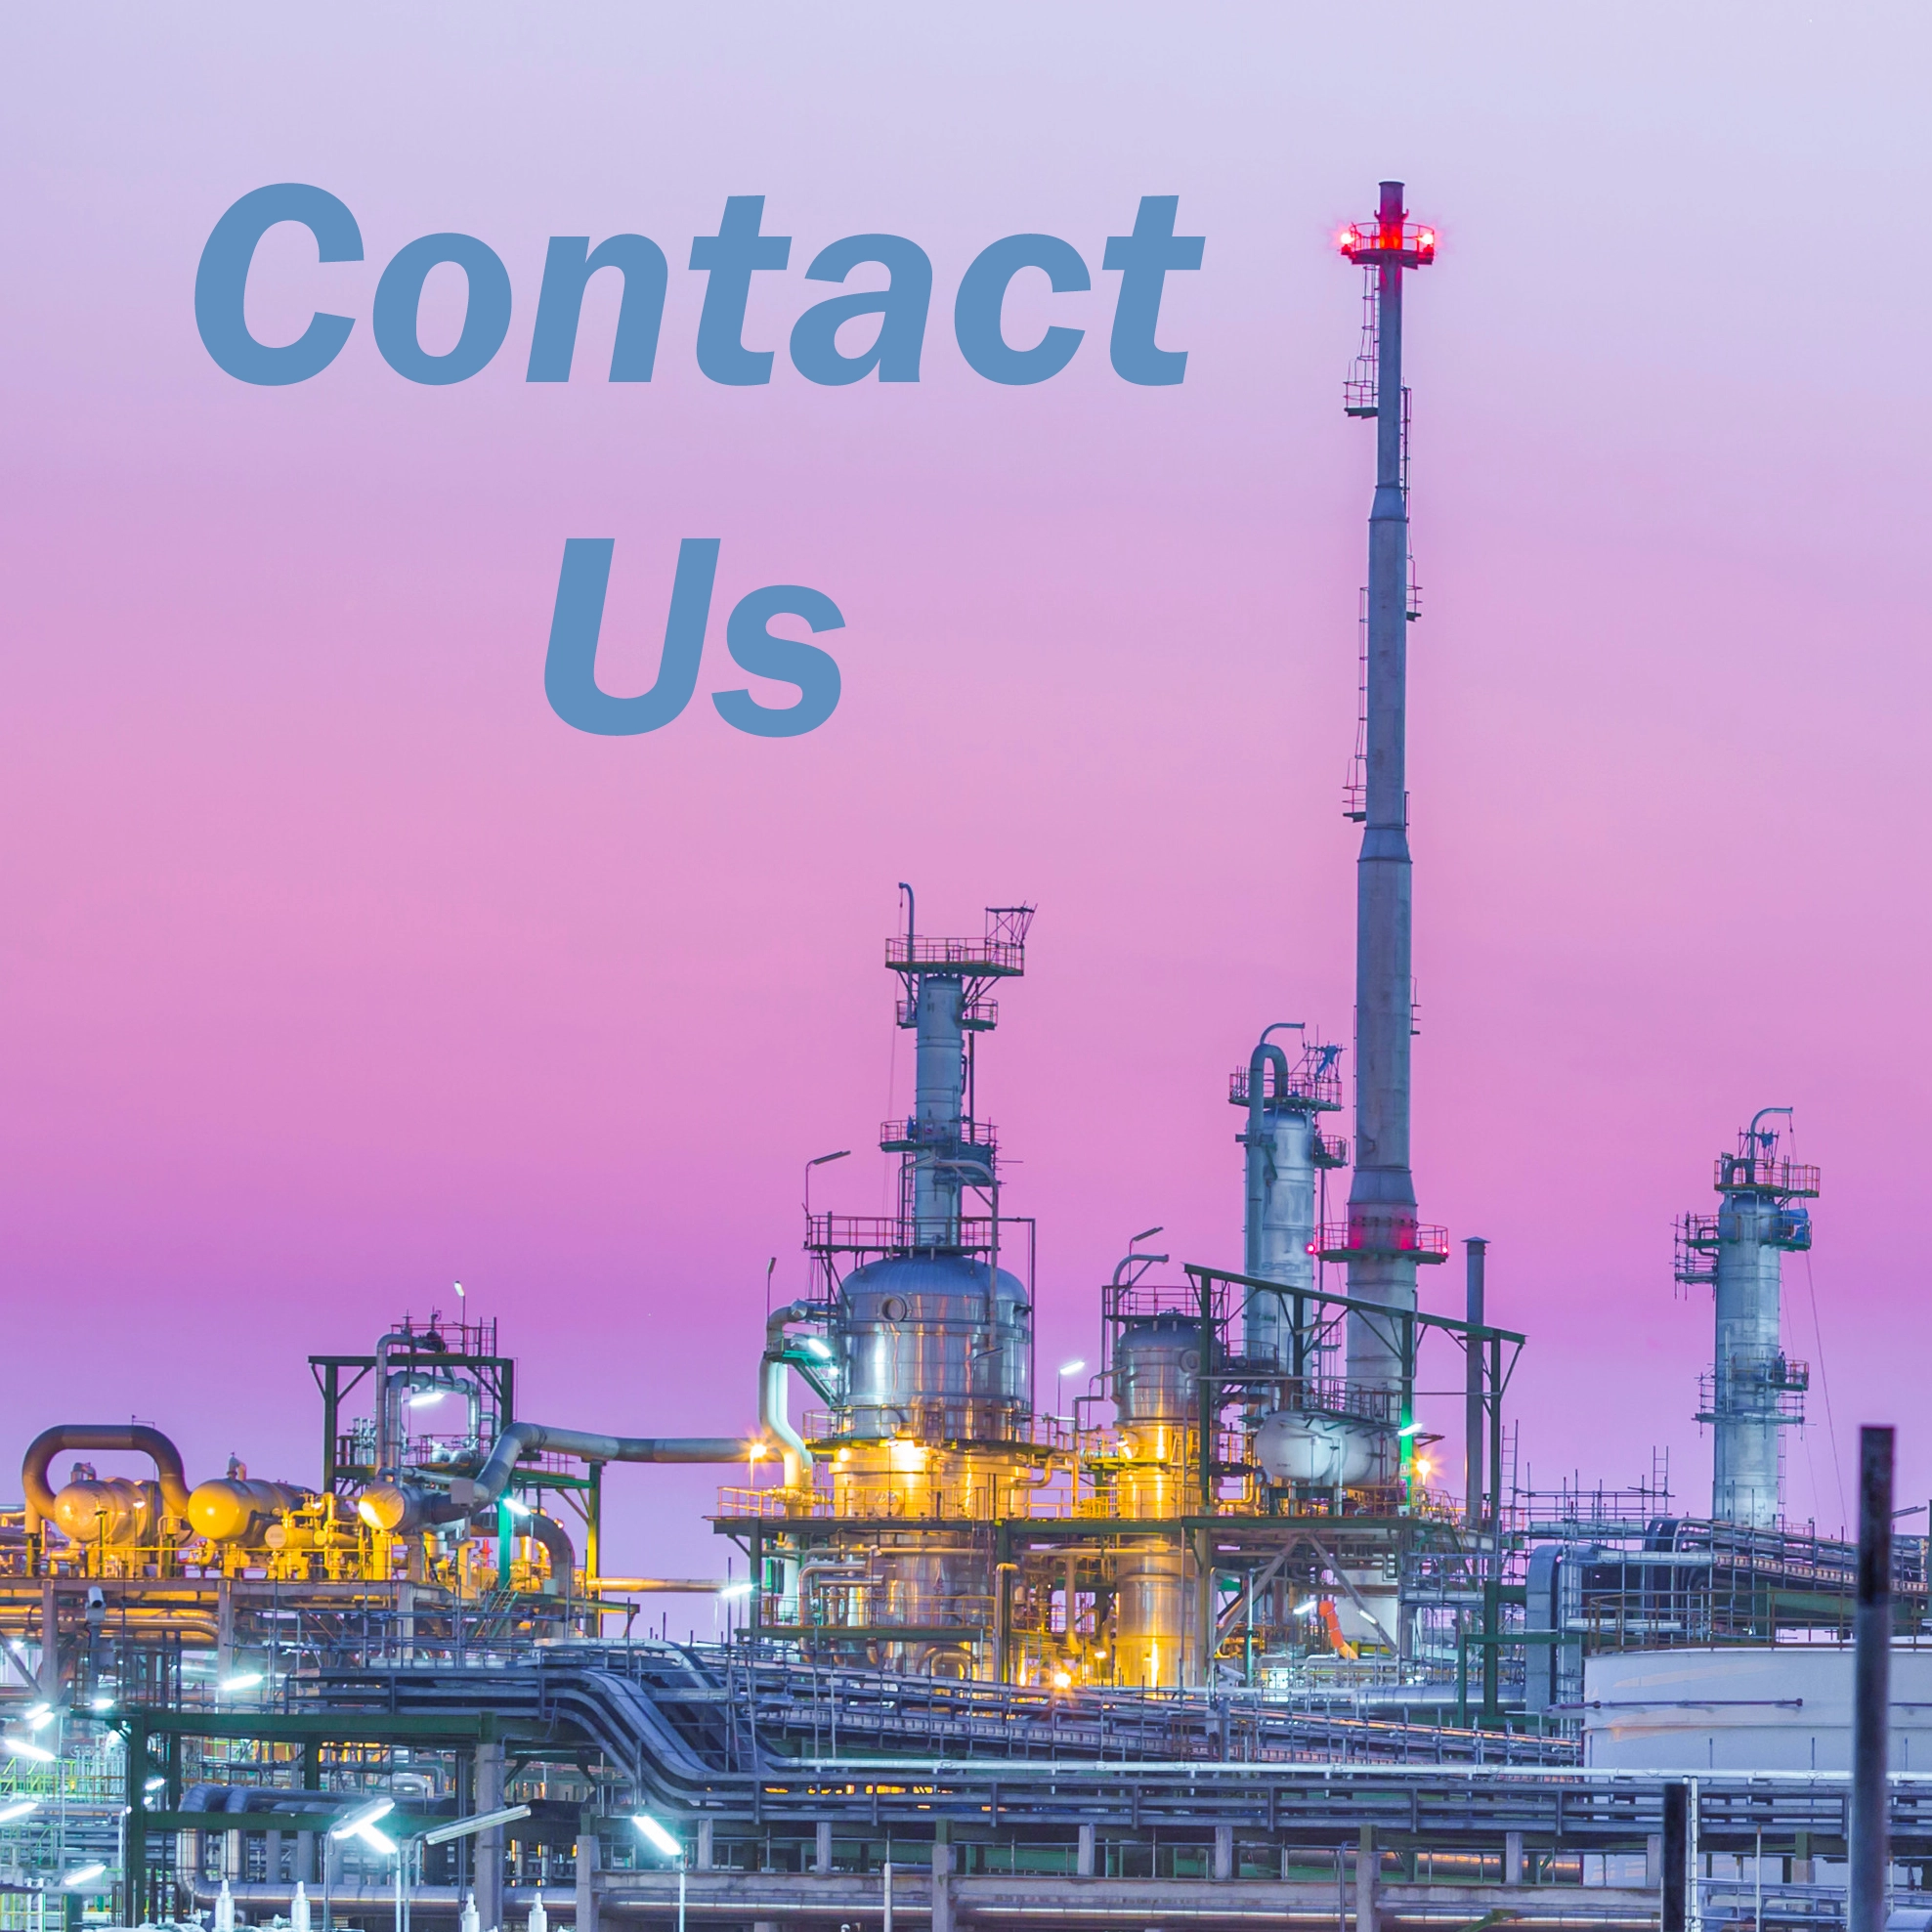 Contact Us words over refinery image.